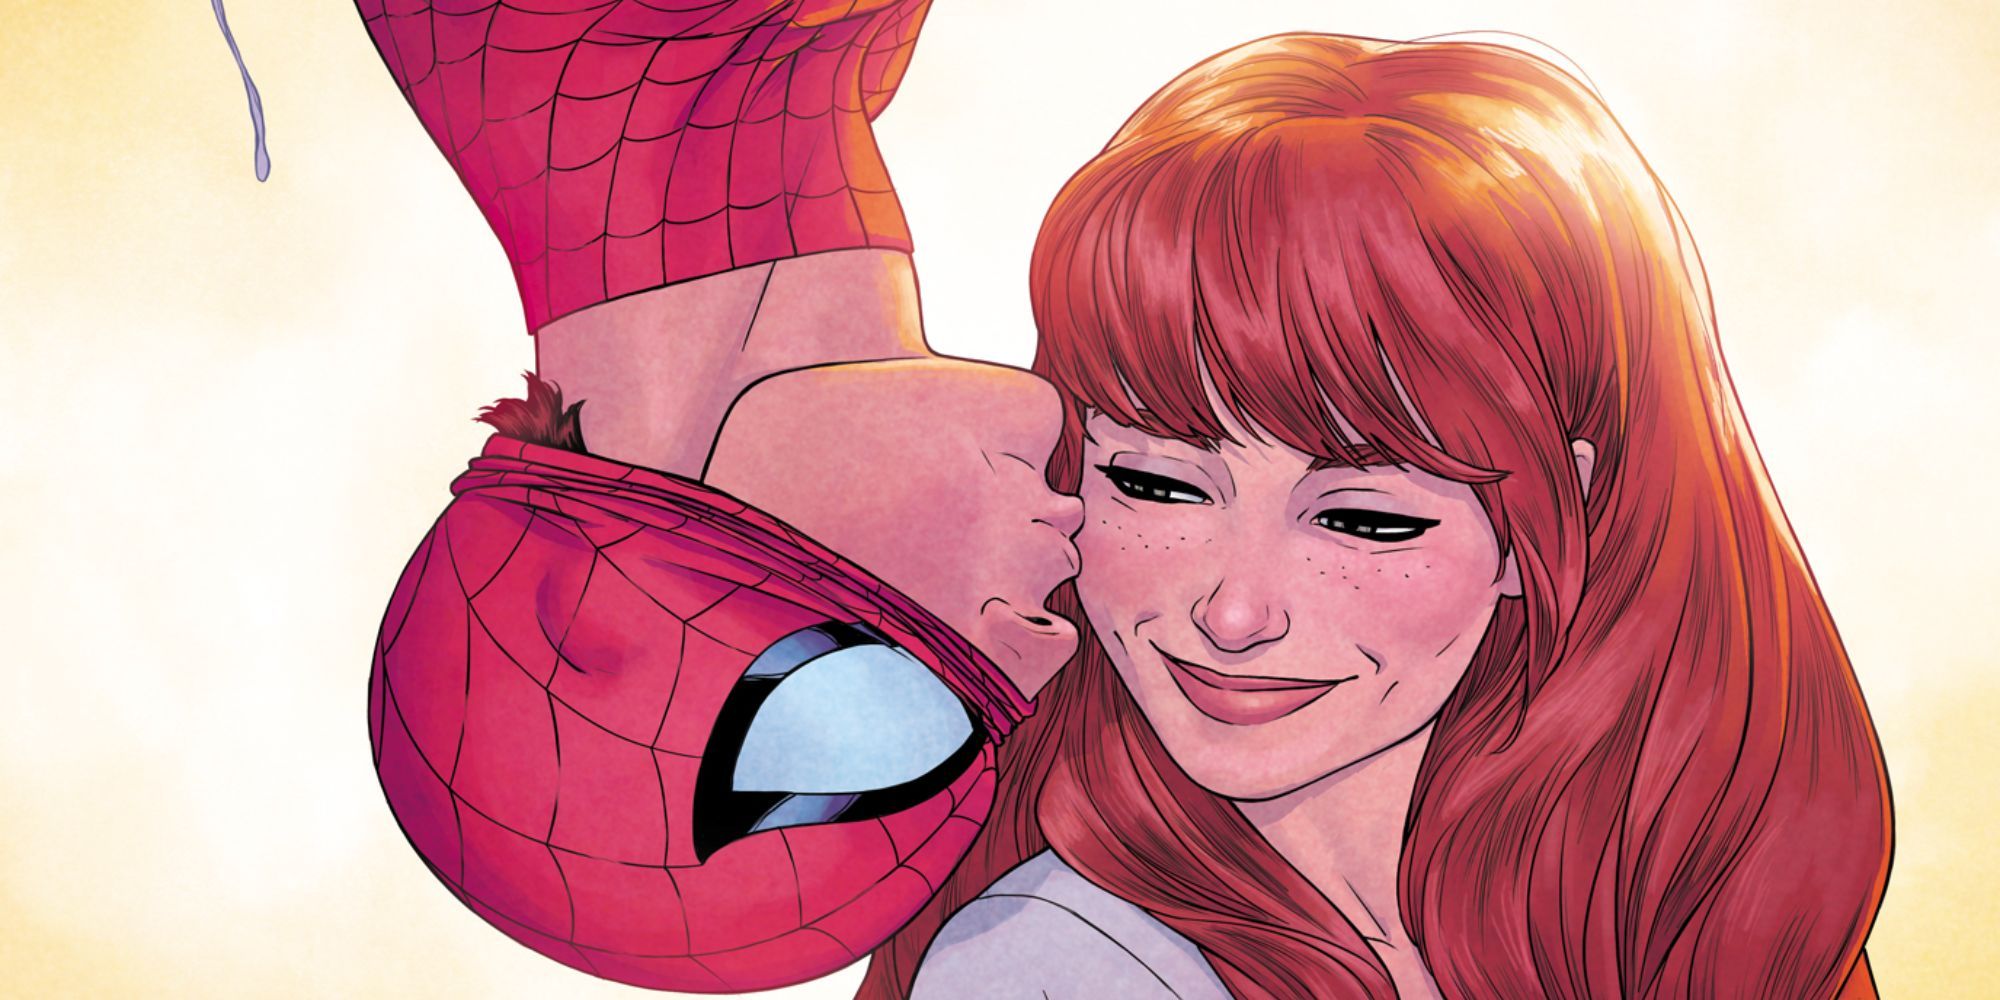 Spider-Man-kissing-Mary-Jane-Watson-on-the-cheeks-while-hanging-upside-down-1